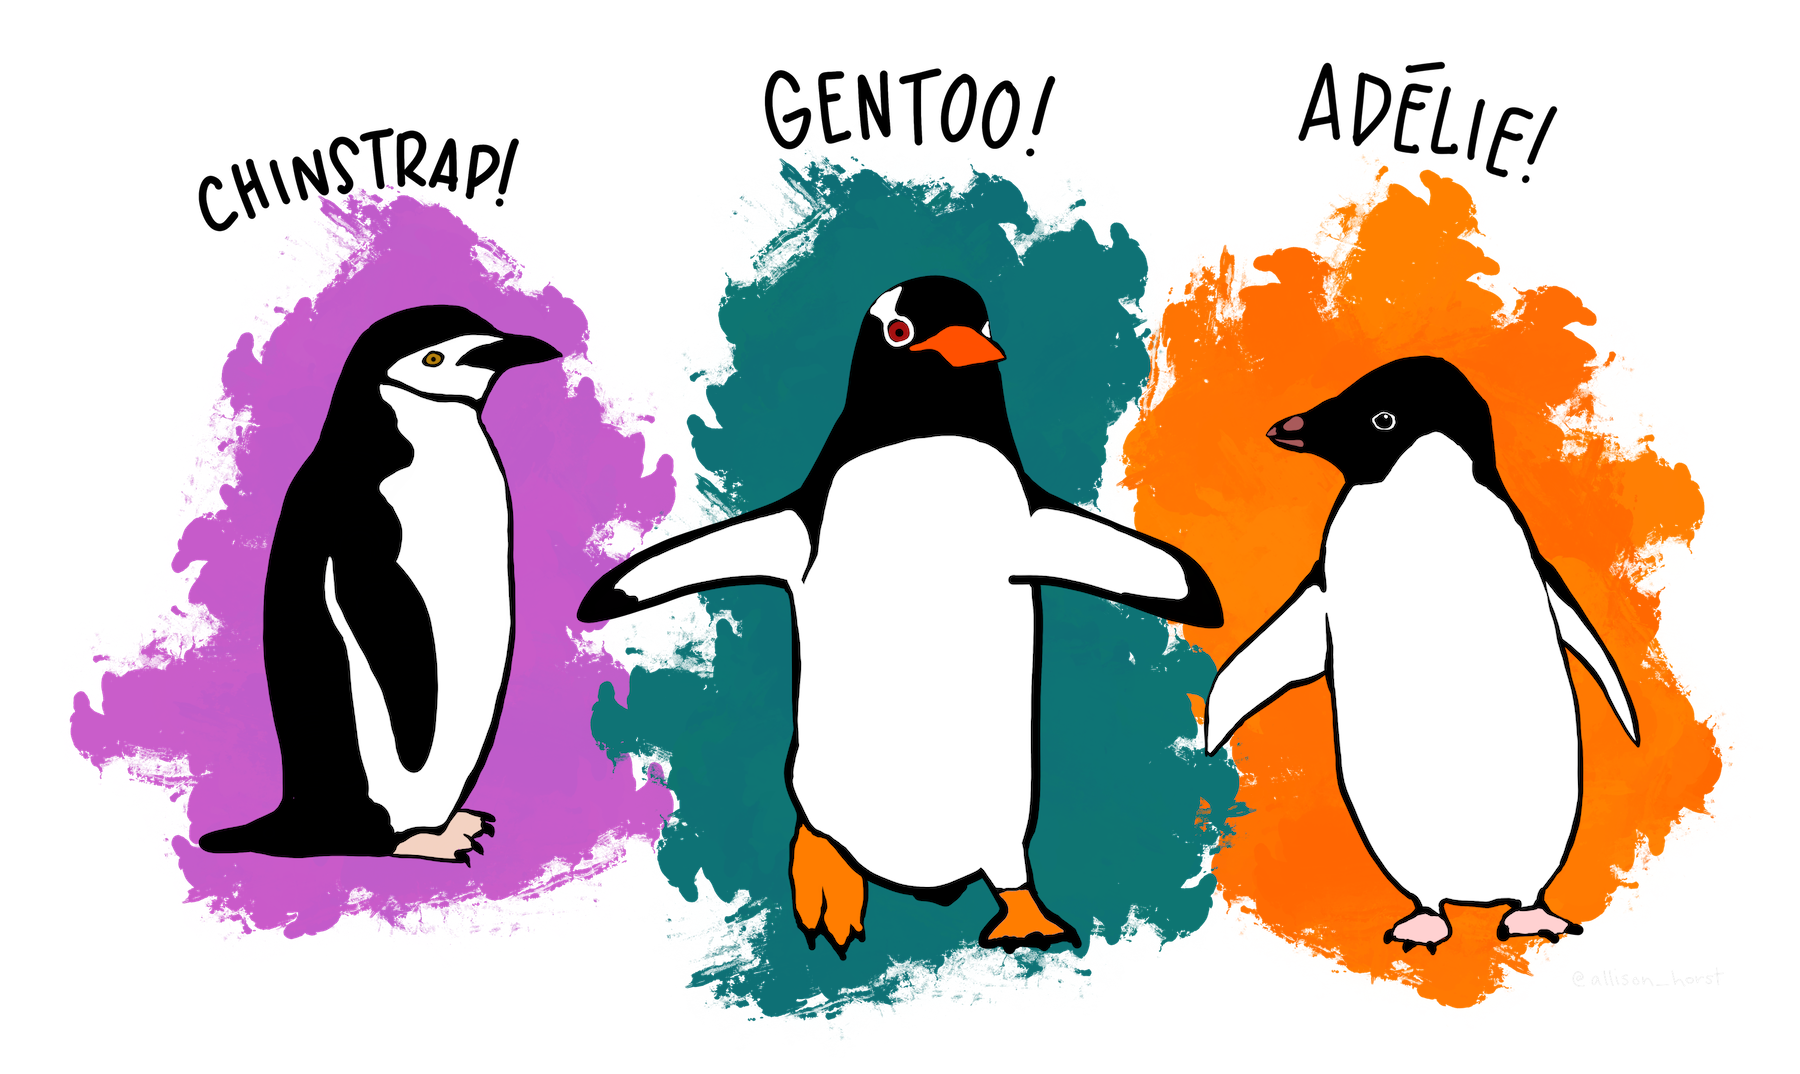 Illustration of the three species of penguins found in the Palmer Archipelago, Antarctica: Chinstrap, Gentoo and Adele